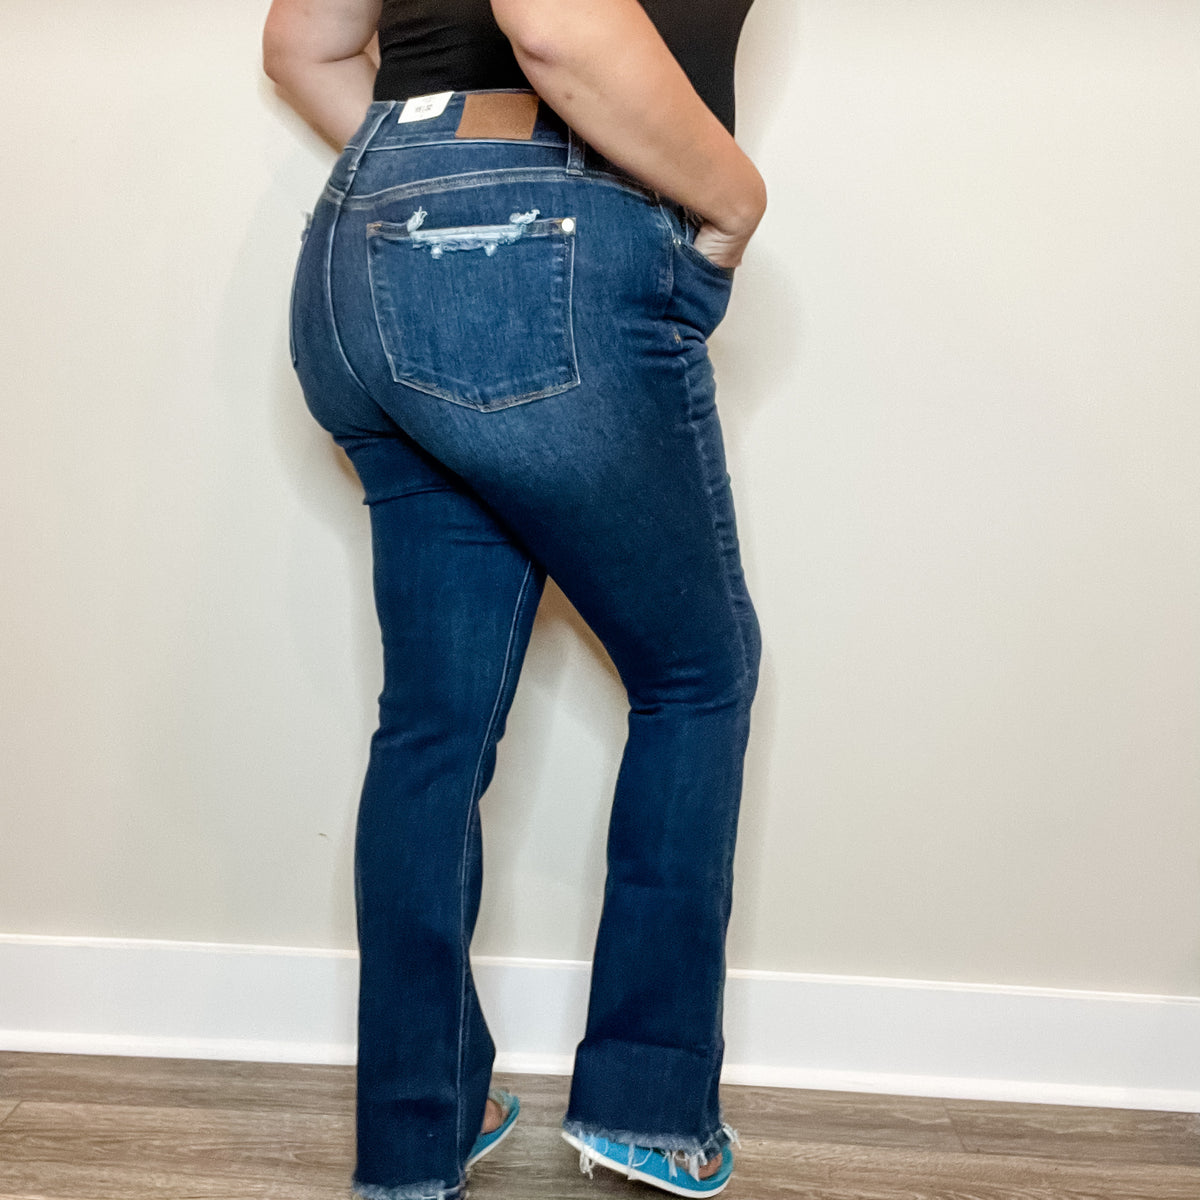 Judy Blue "Old Yeller" Bootcut Jeans